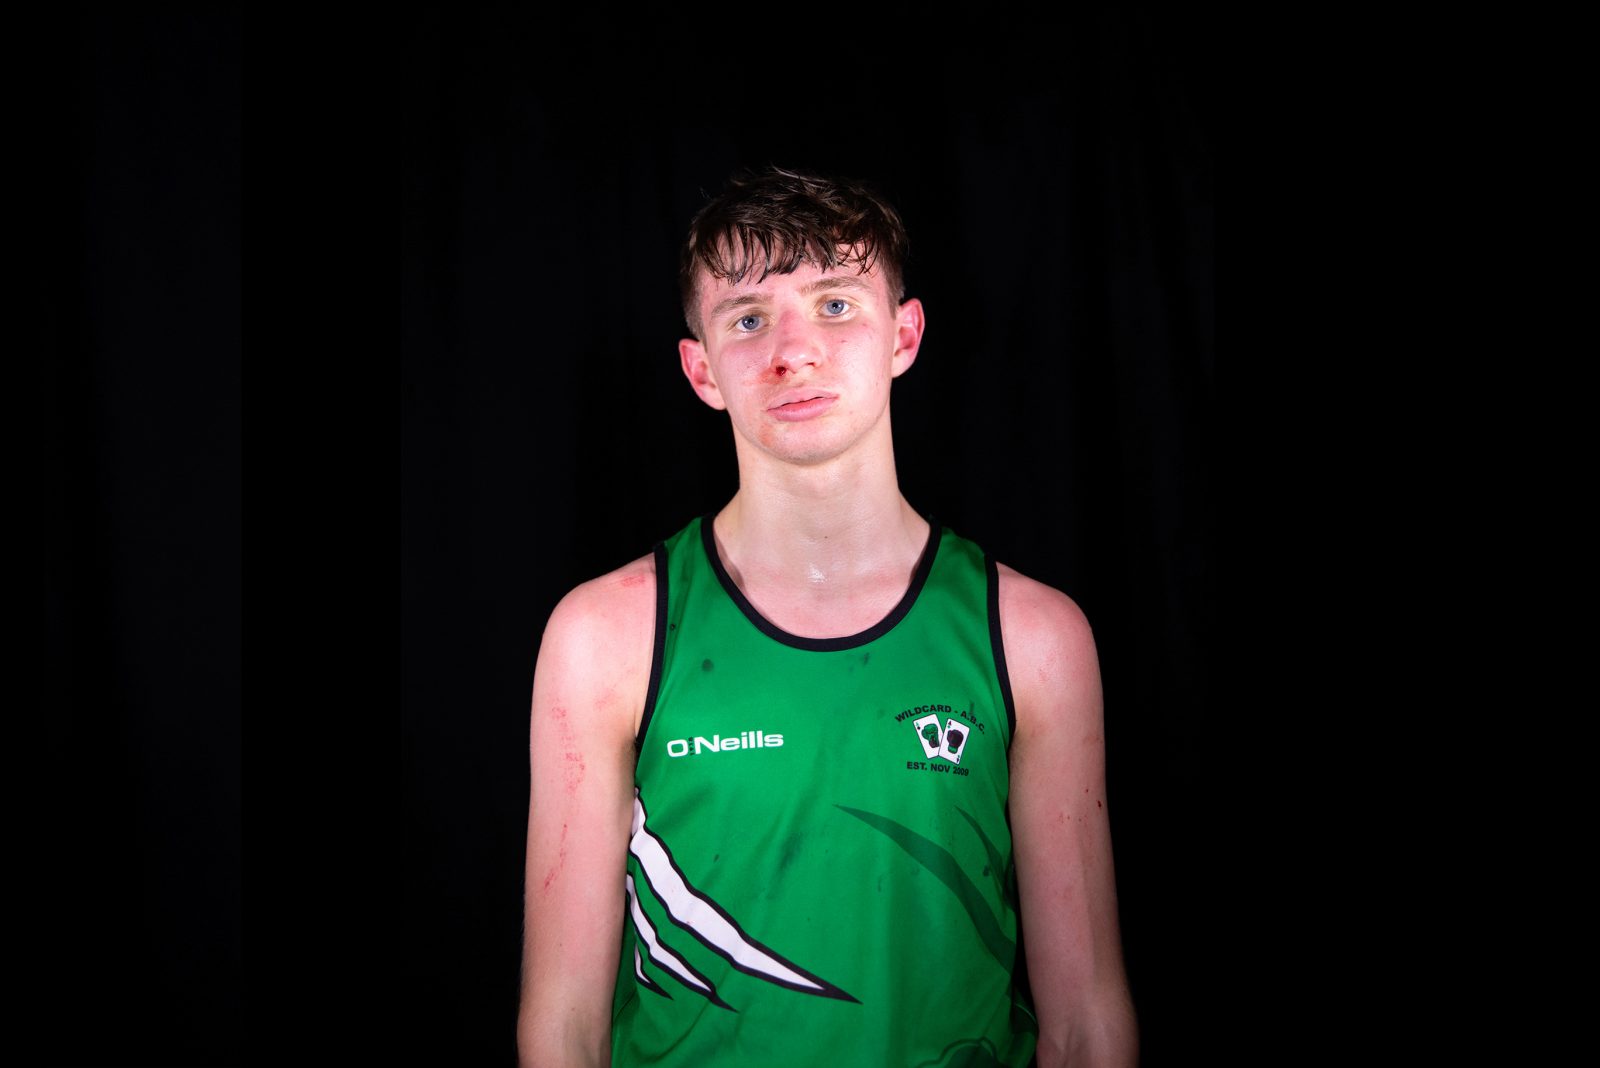 A young person with dark hair, wearing a green sports vest stands looking directly at the camera. They have a bloody nose and they are sweating.